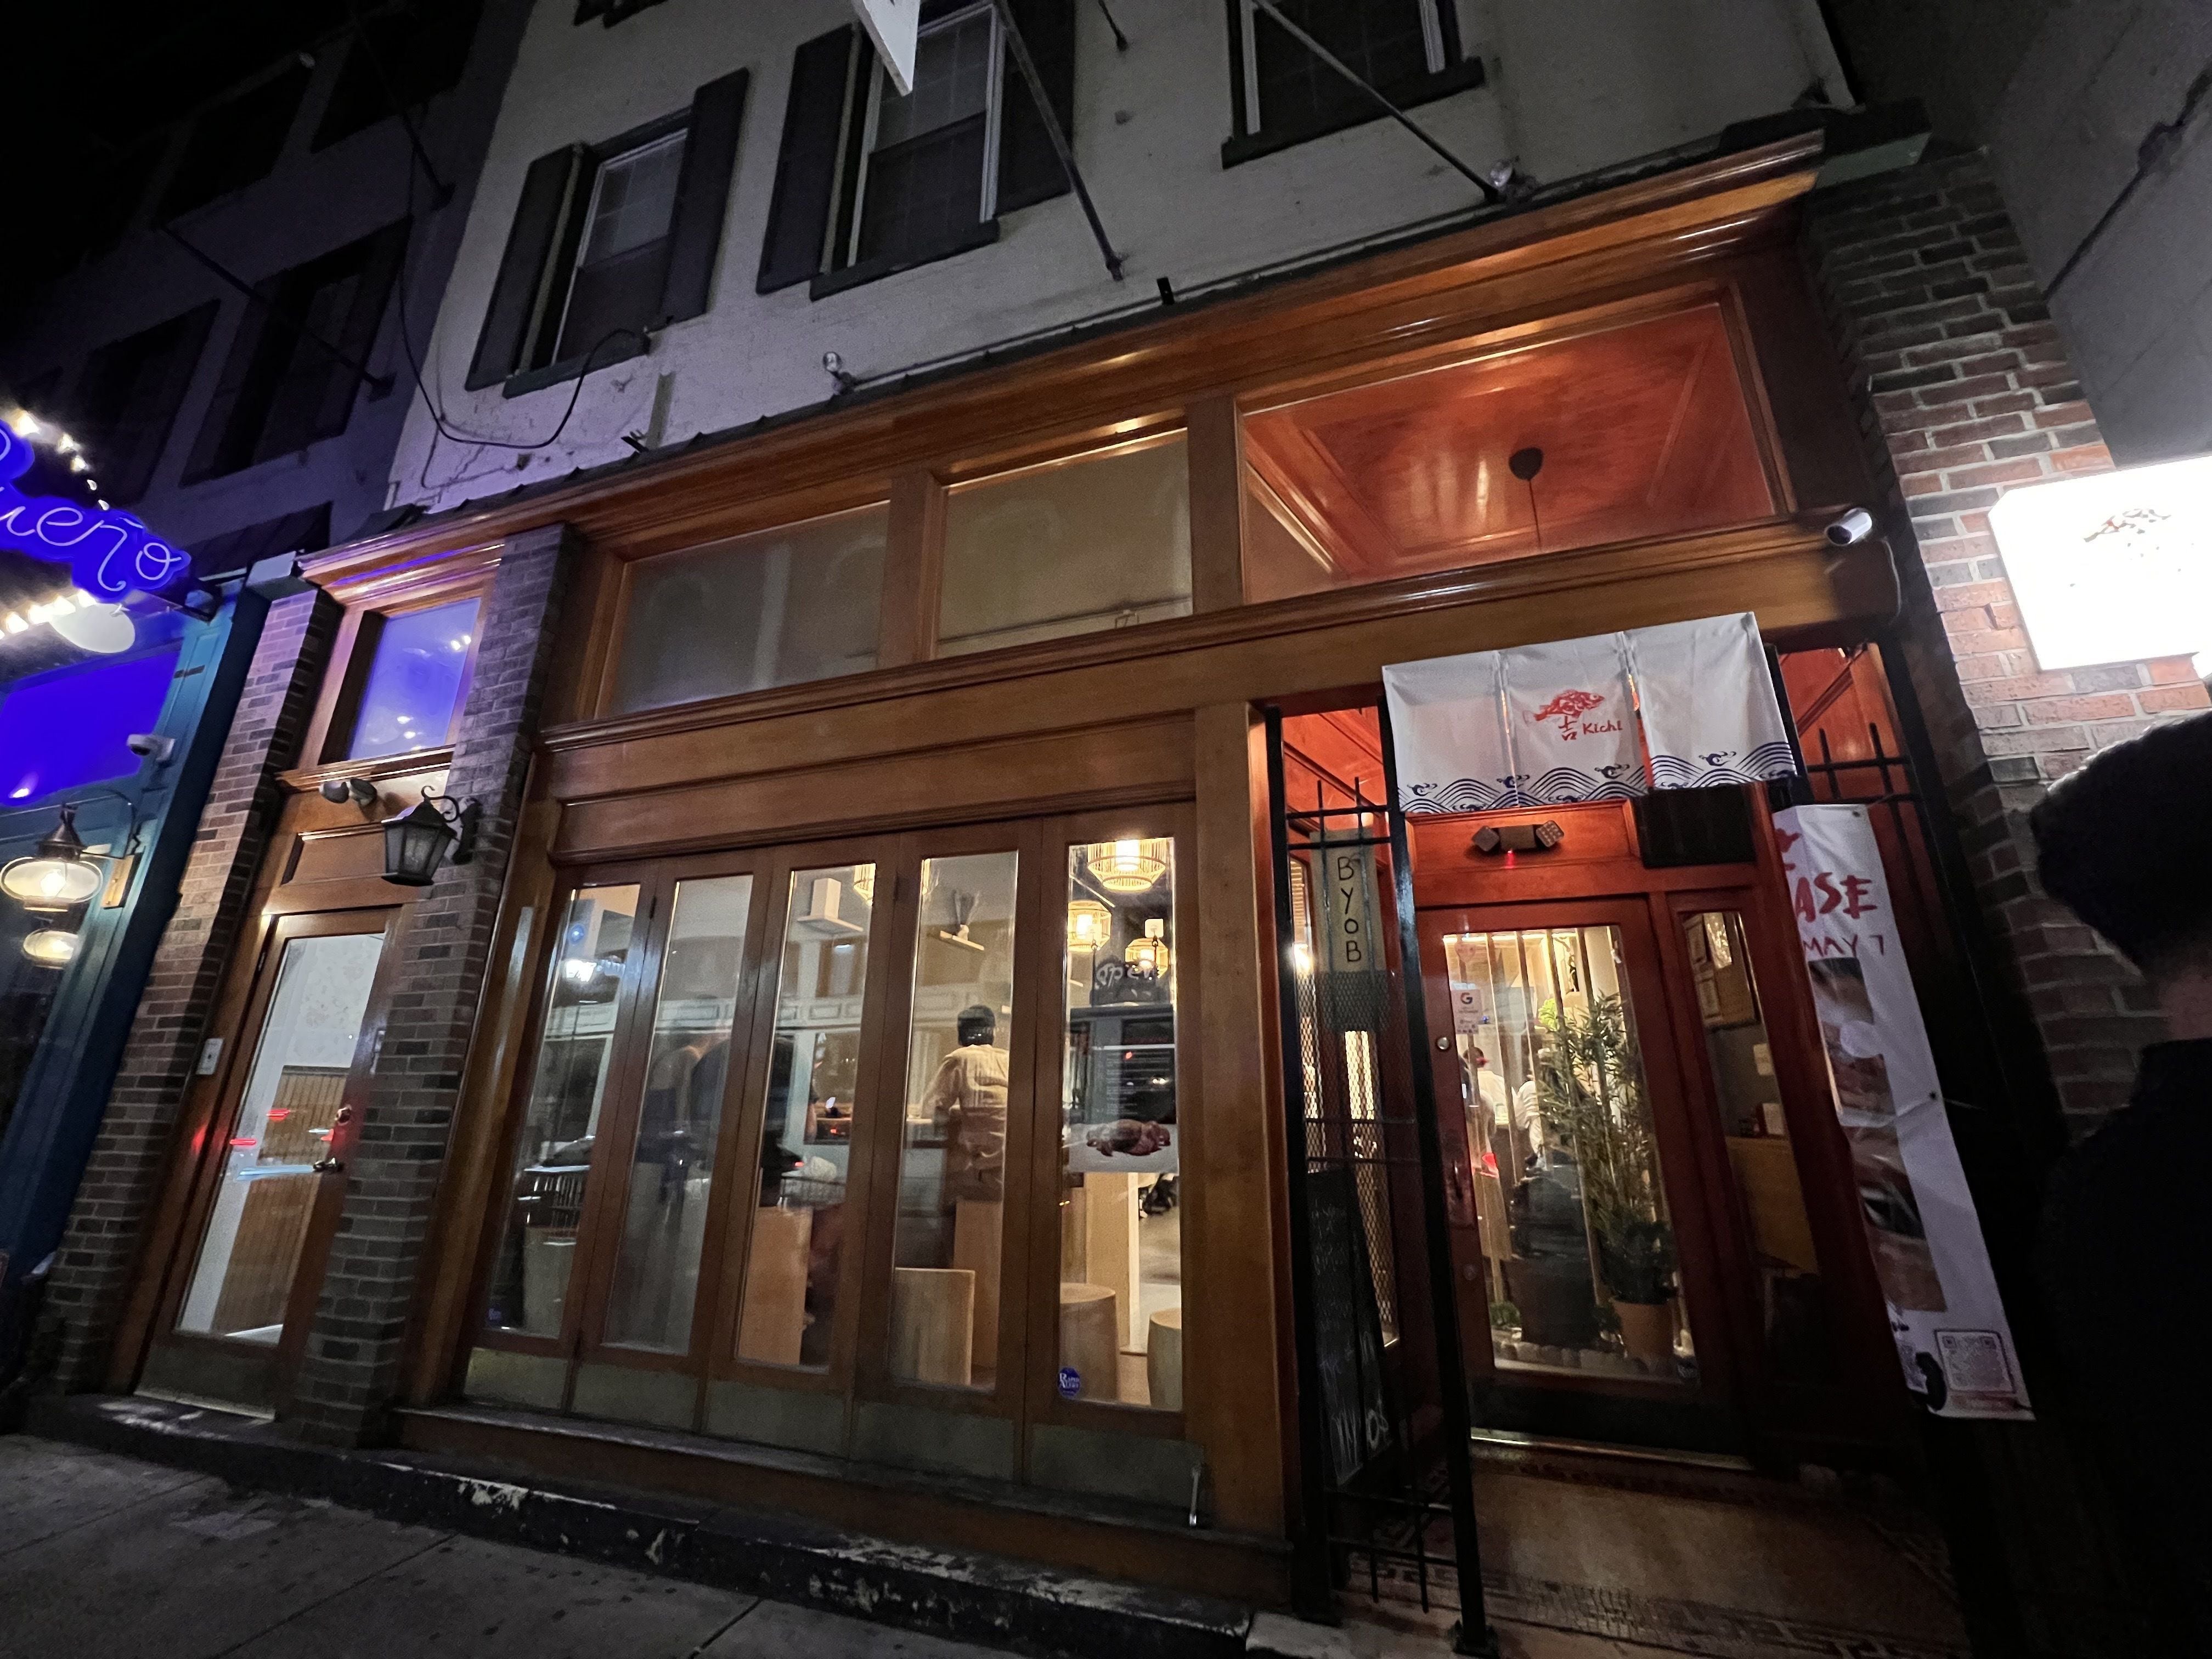 Kichi Omakase offers a 15-course sushi dinner in only an hour